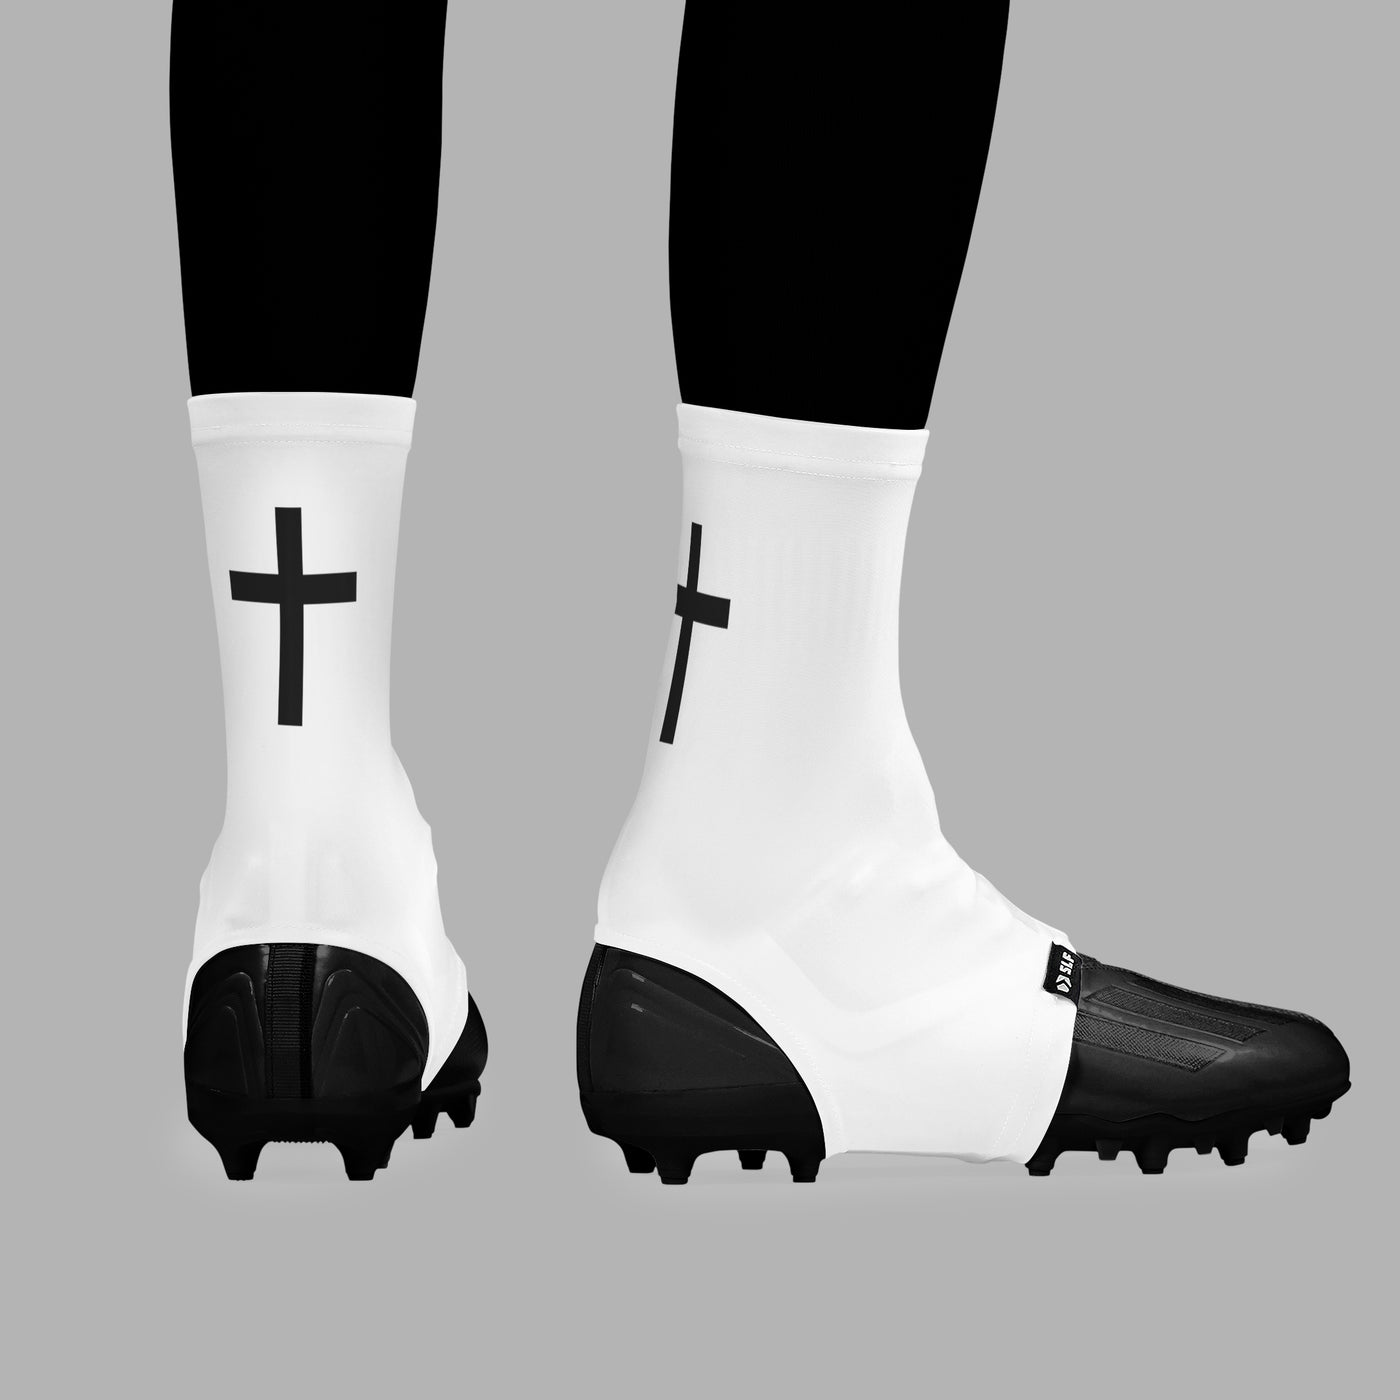 Faith Cross White Spats / Cleat Covers